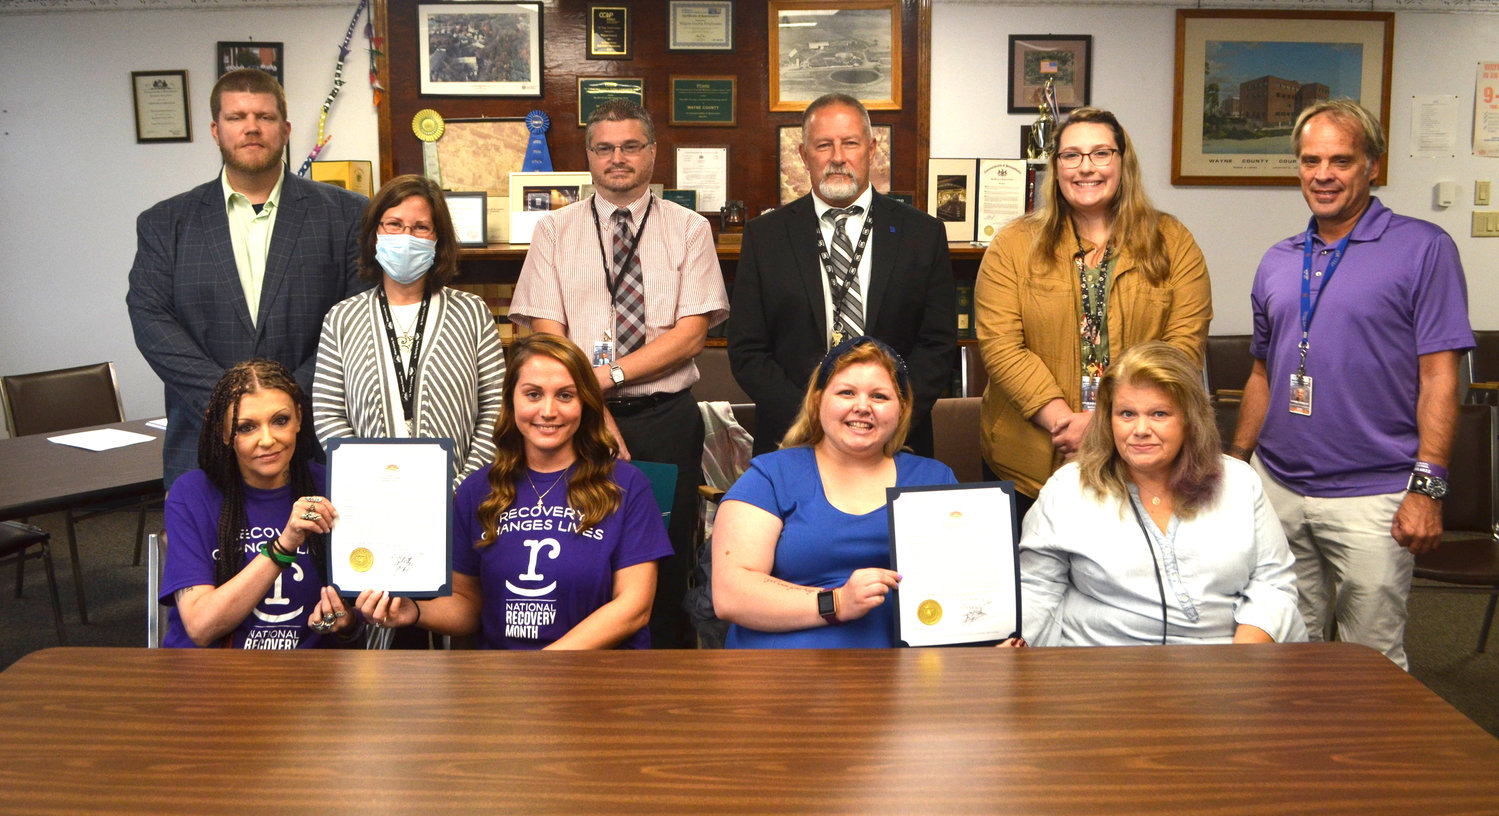 Gathered together to proclaim National Recovery Month were Autumn DeLong-VanDerhoff, seated left, Kelly Wietry, Bonnie Smith, Carolyn Smith, Steve Bair, standing left, Jocelyn Cramer, Jeff Zerechak, Brian Smith, Kylie Emerson, and Jim Simpson.